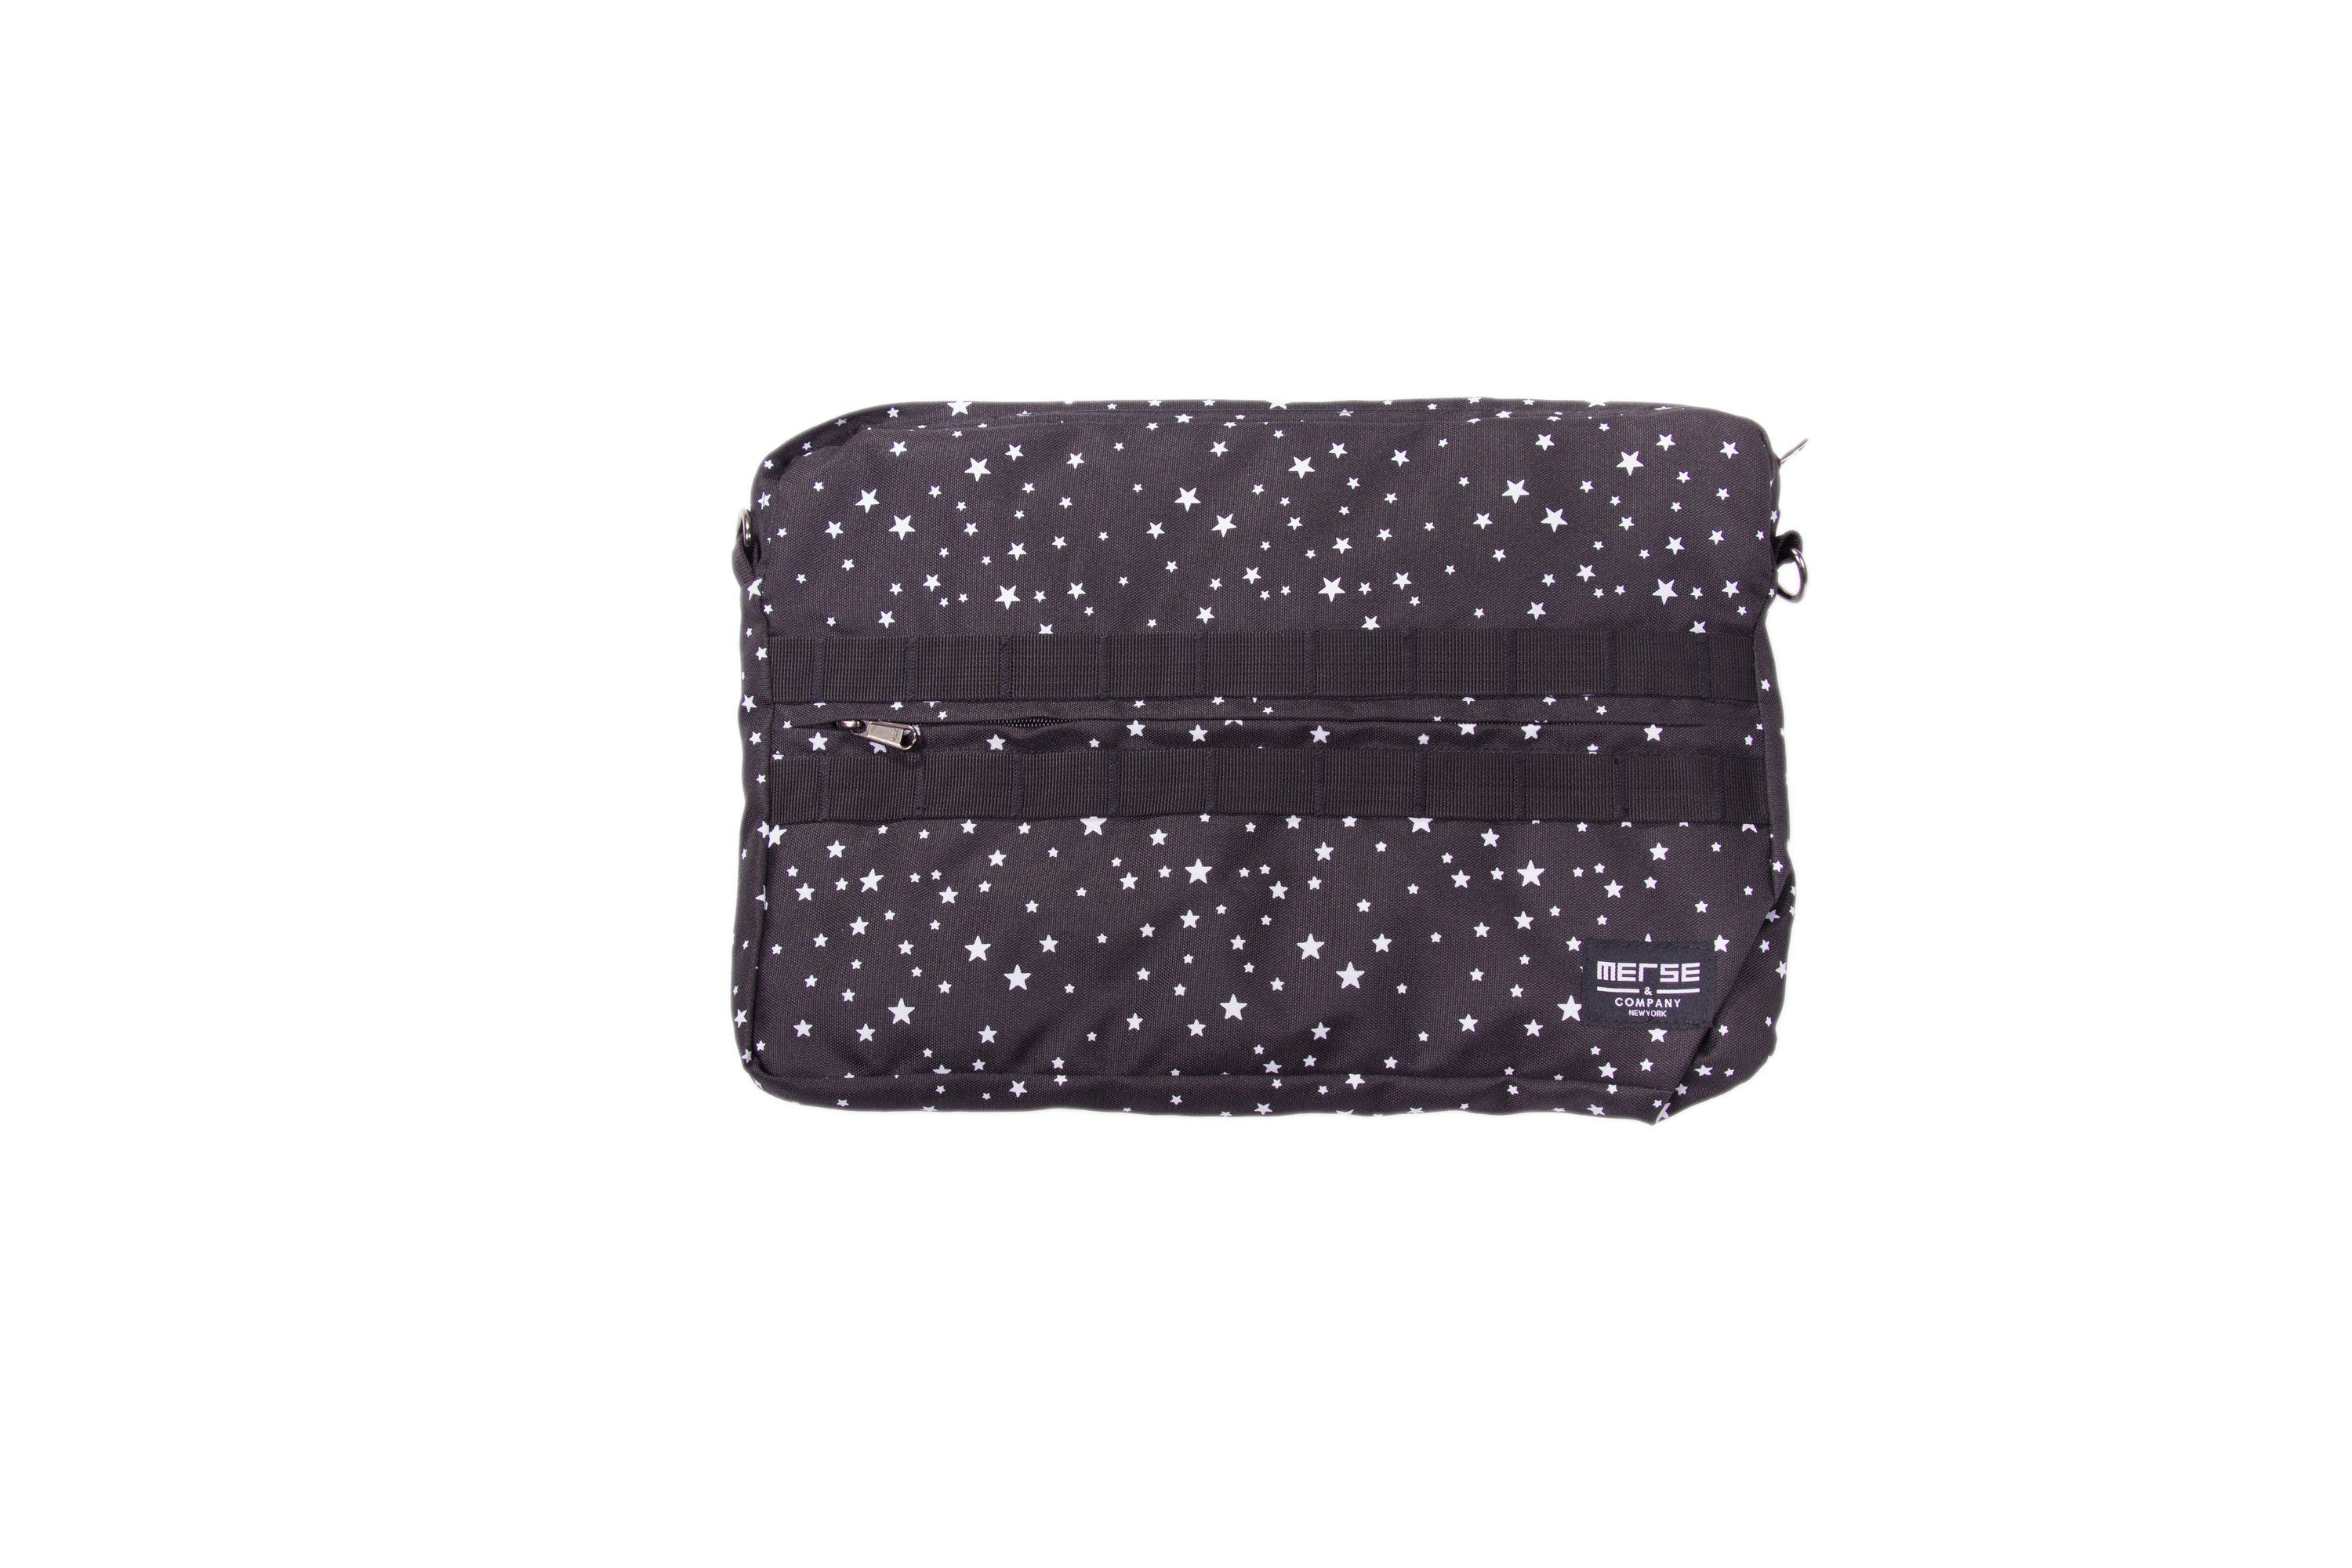 Merse & Company Starry Nite Reversible System Laptop Bag